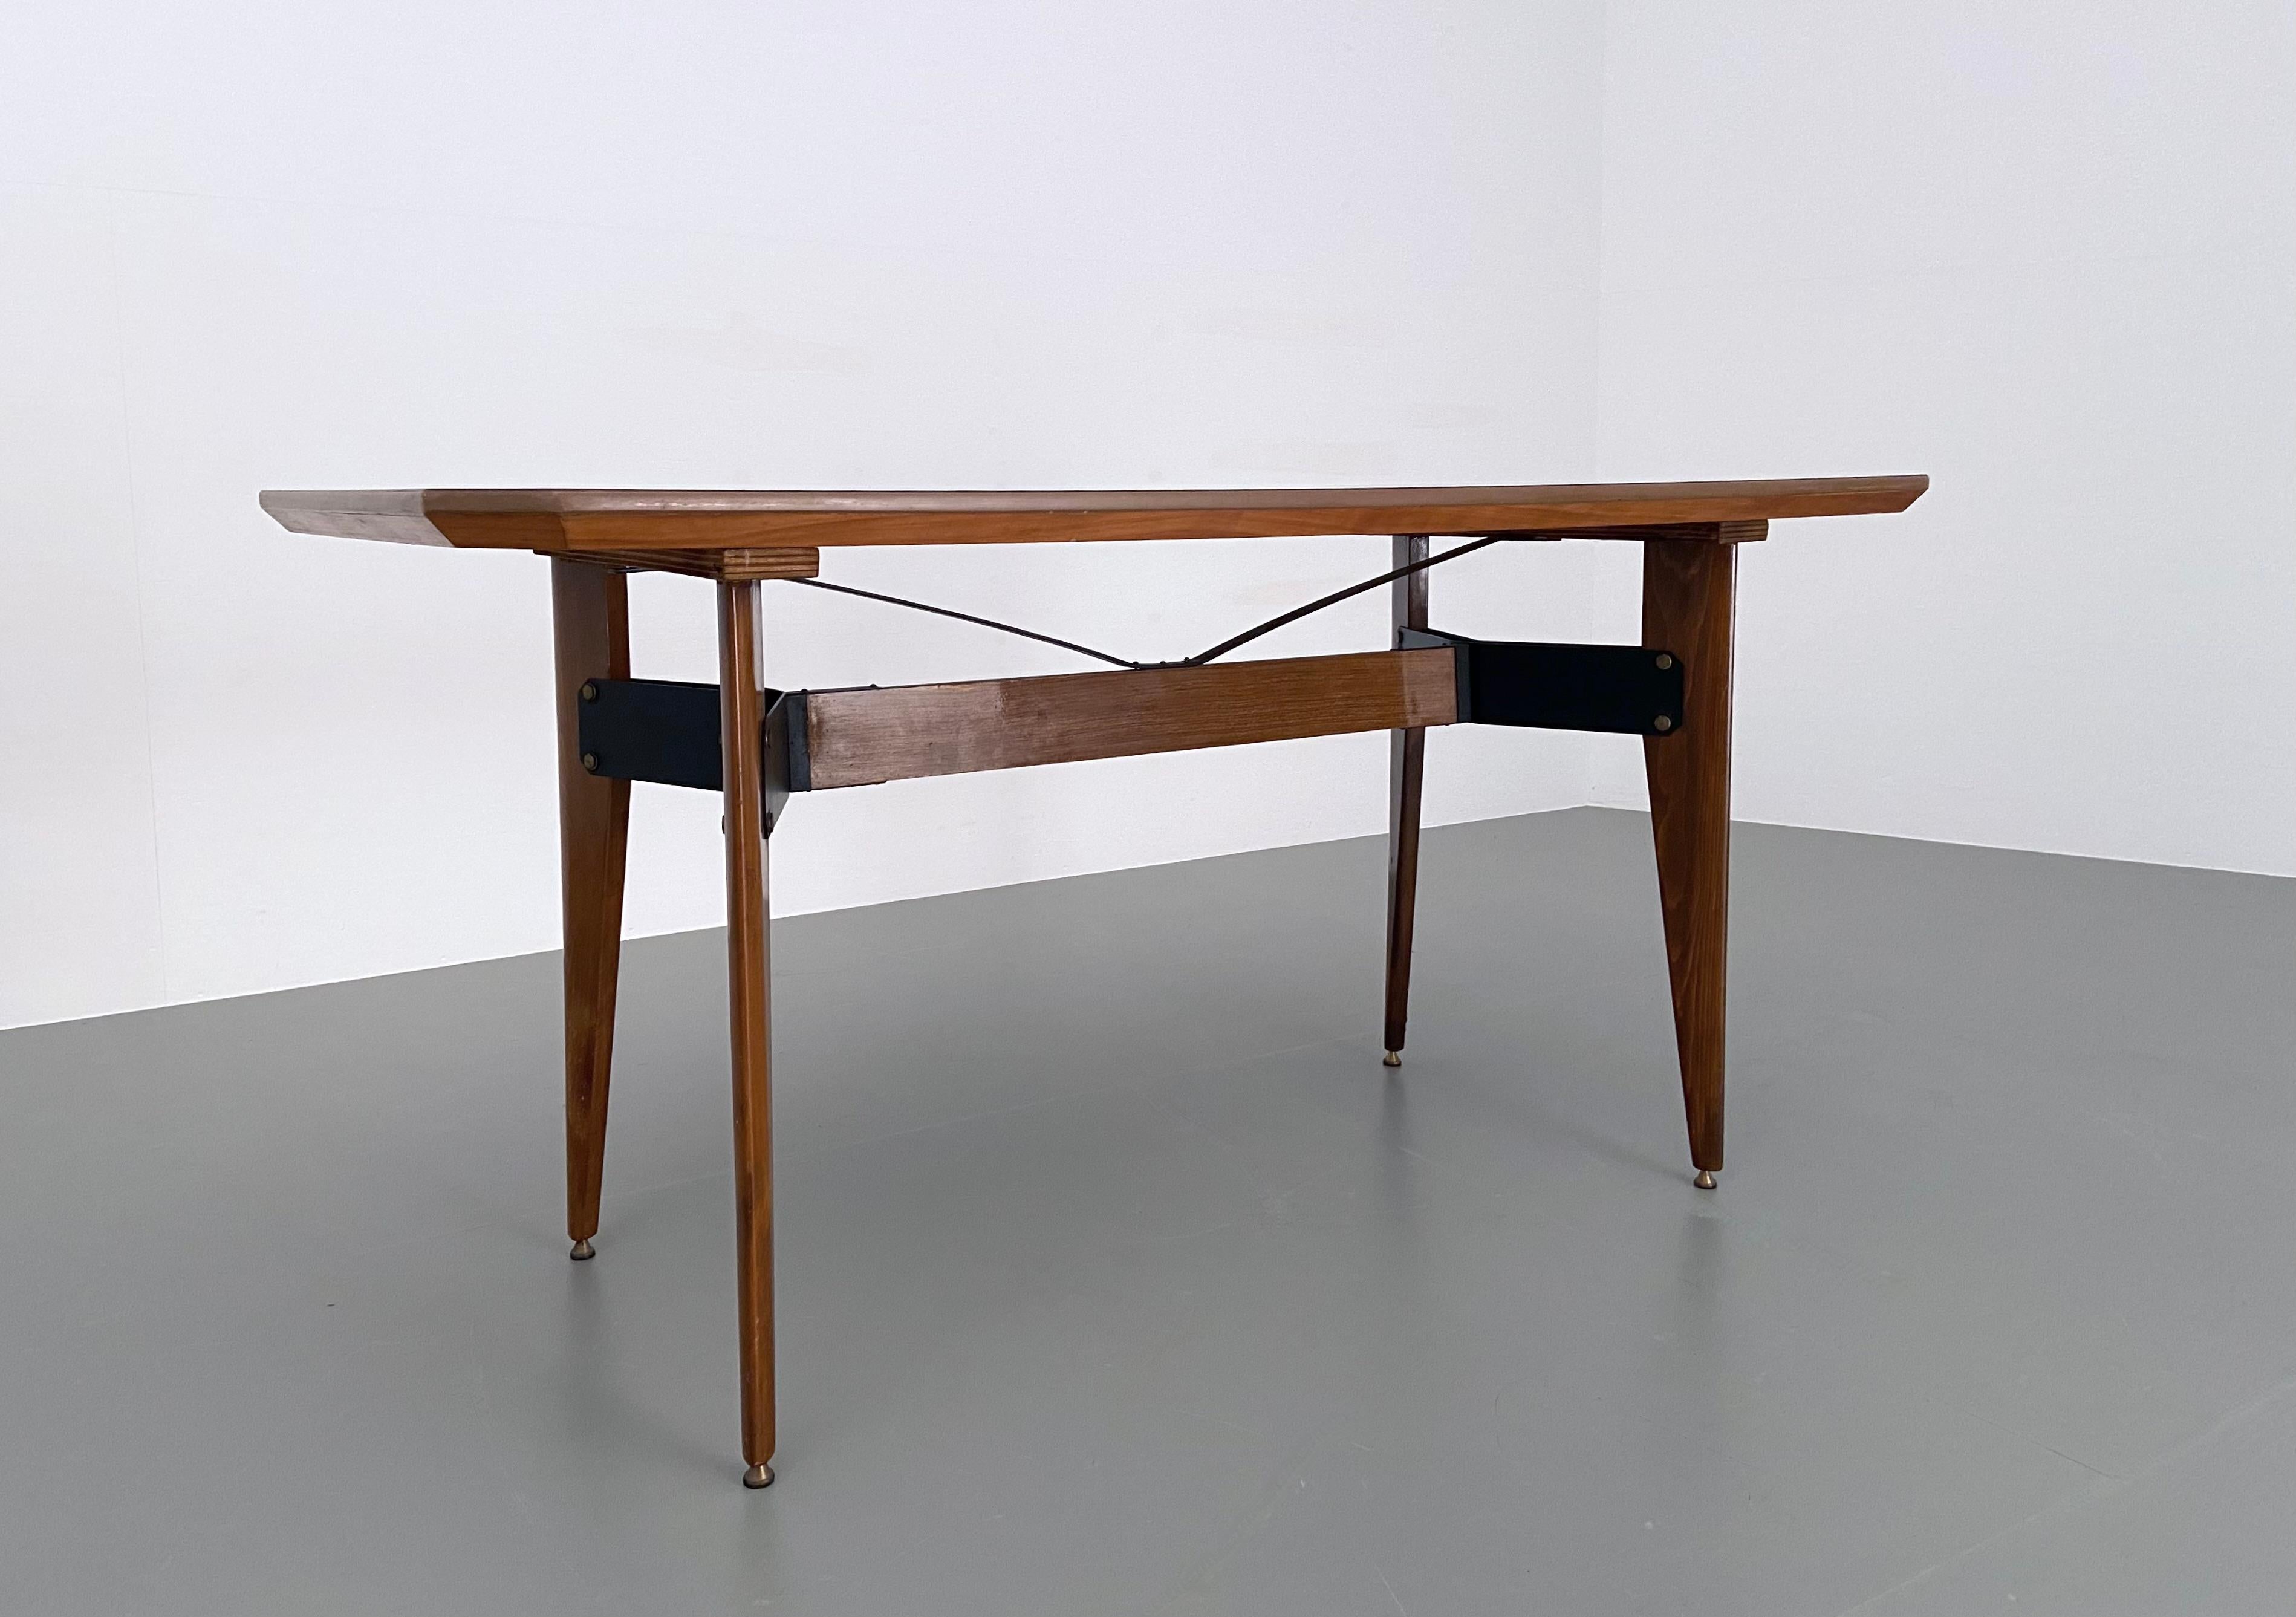 Smaller dining-room table with typical graceful Italian shapes. The table has somewhat flat and tapered legs and a V-shaped construction in metal and wood. Some nice details can be found back in the brass feet (!) and in the pleasant shape of the